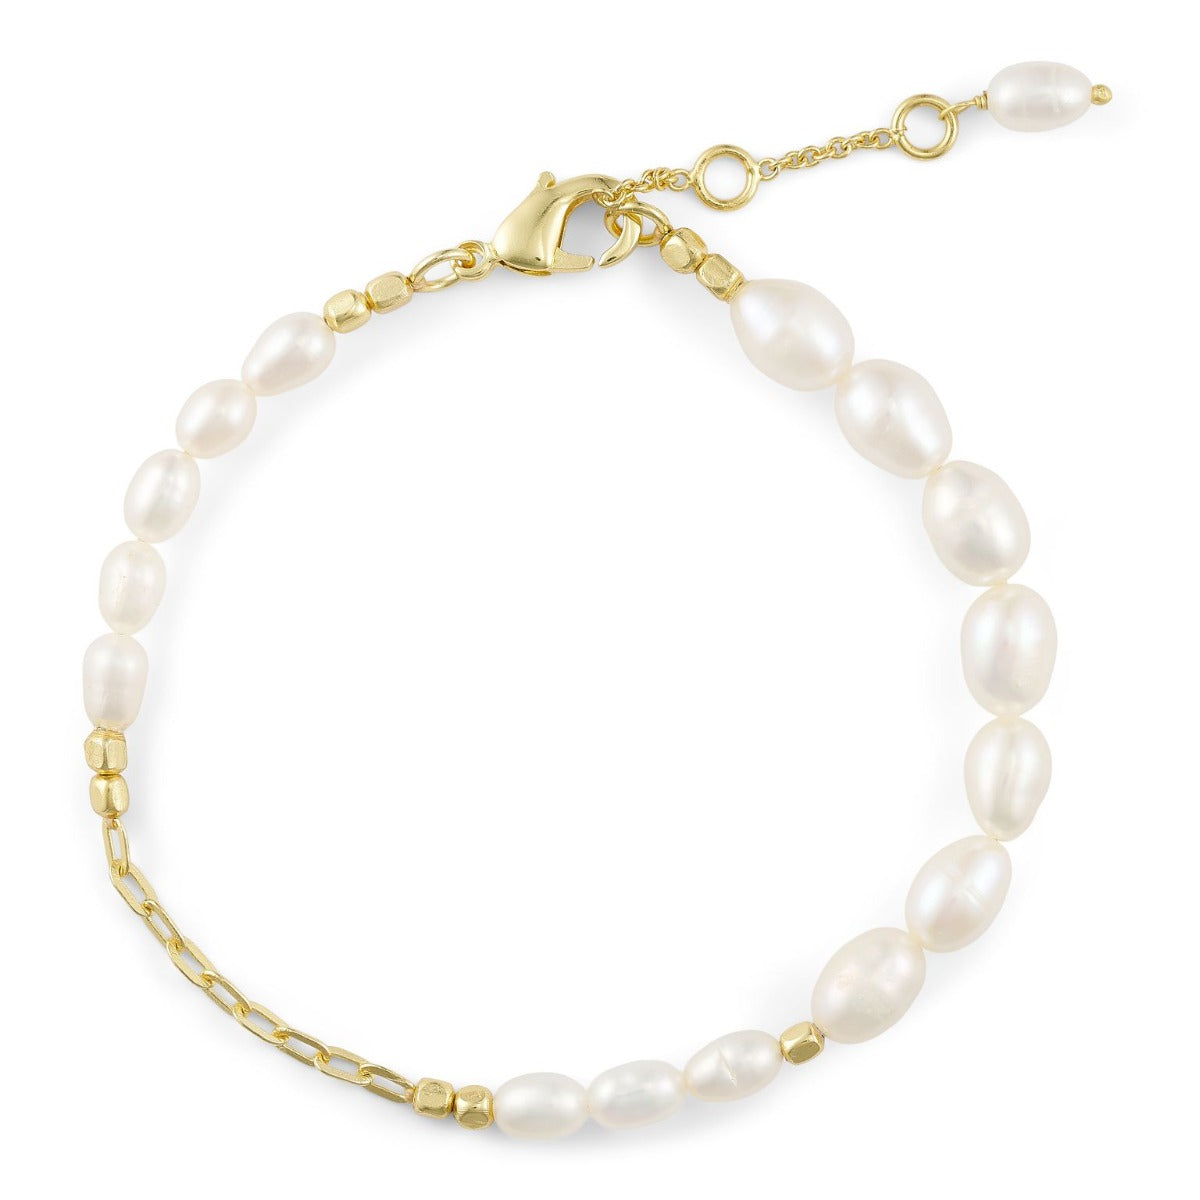 Pure by nat bracelet with freshwater pearls